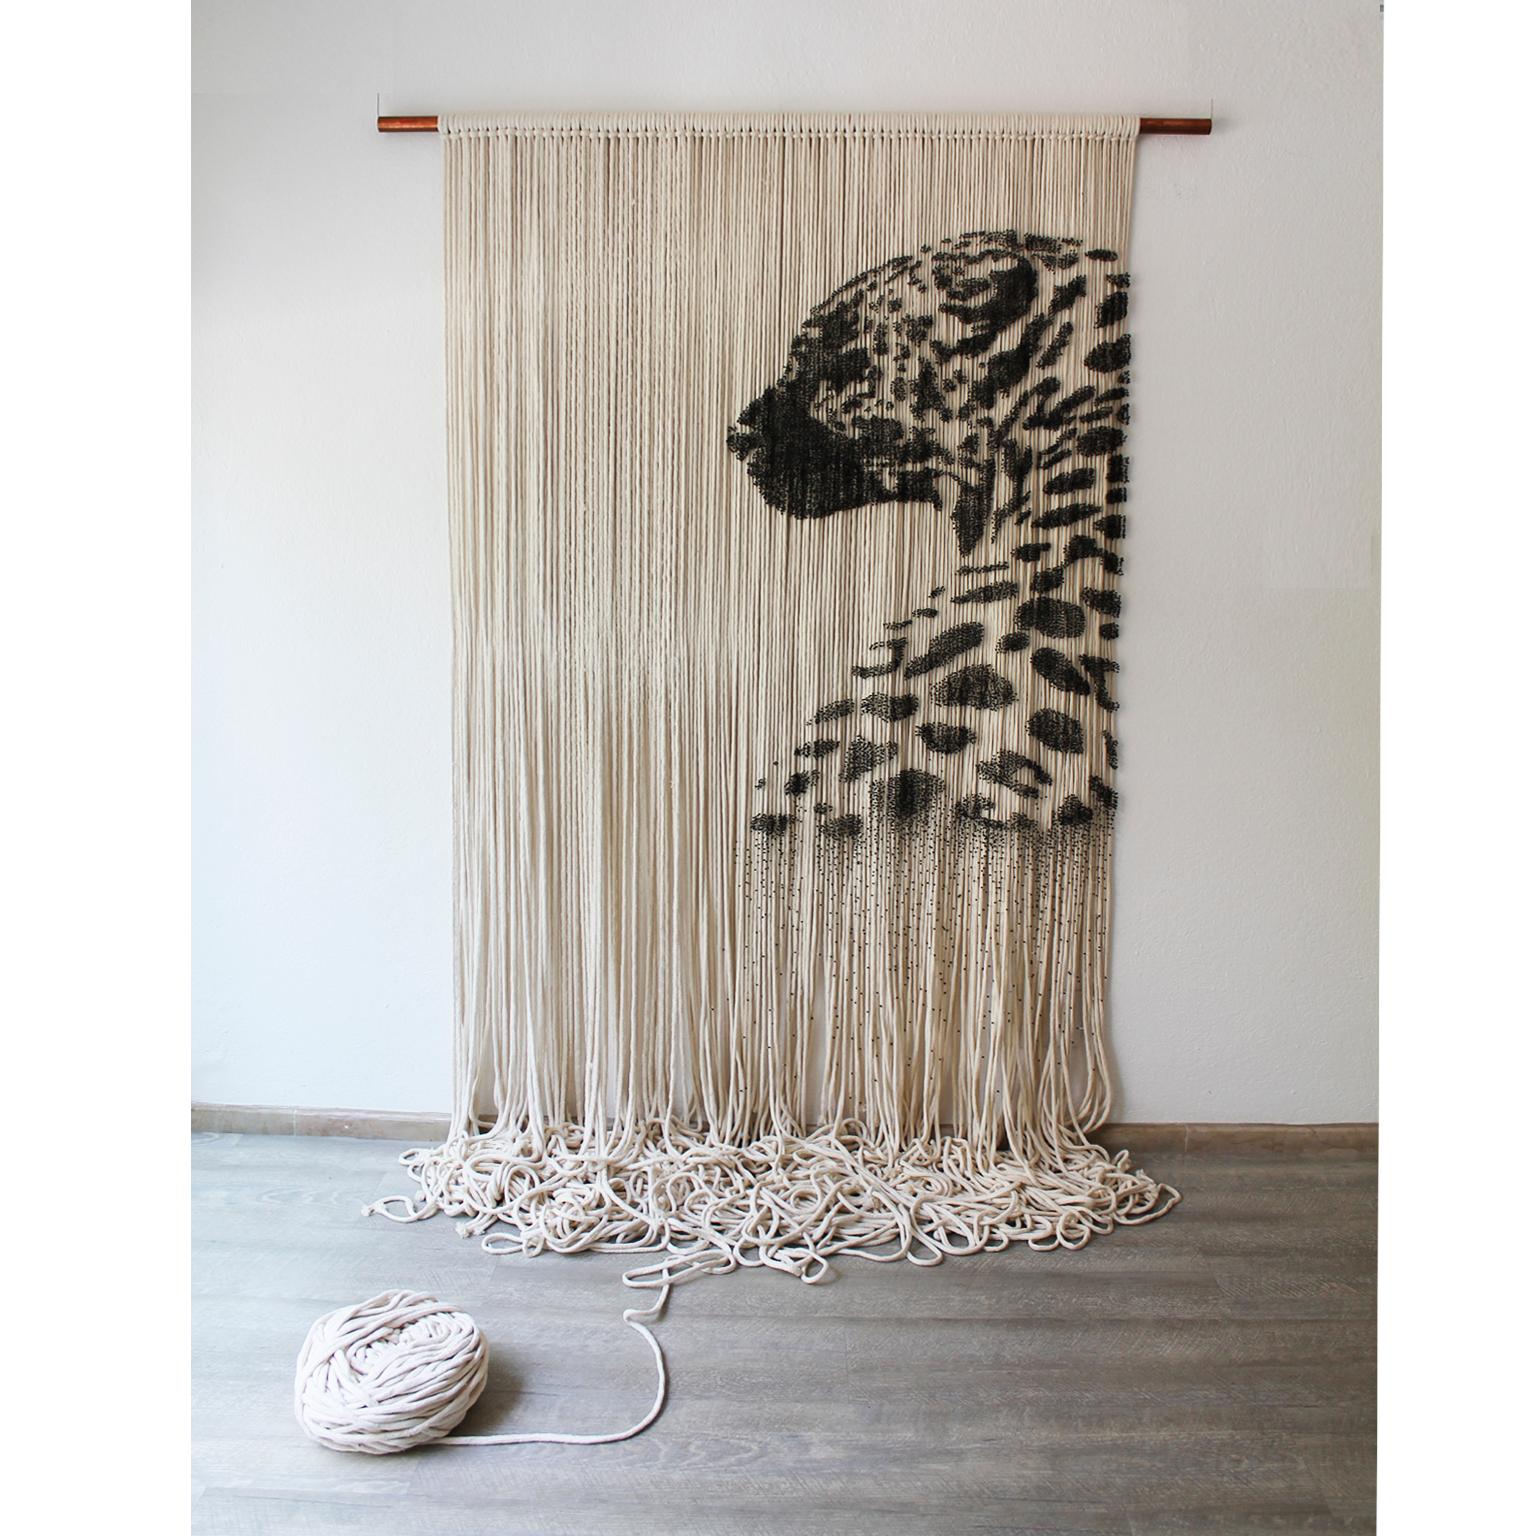 This beautiful work was handmade in Mexico City. It is the largest native cat species of the New World and the third largest in the world. The Jaguar, with its presence connecting North, Central and South America.  It took the artists 7 months to